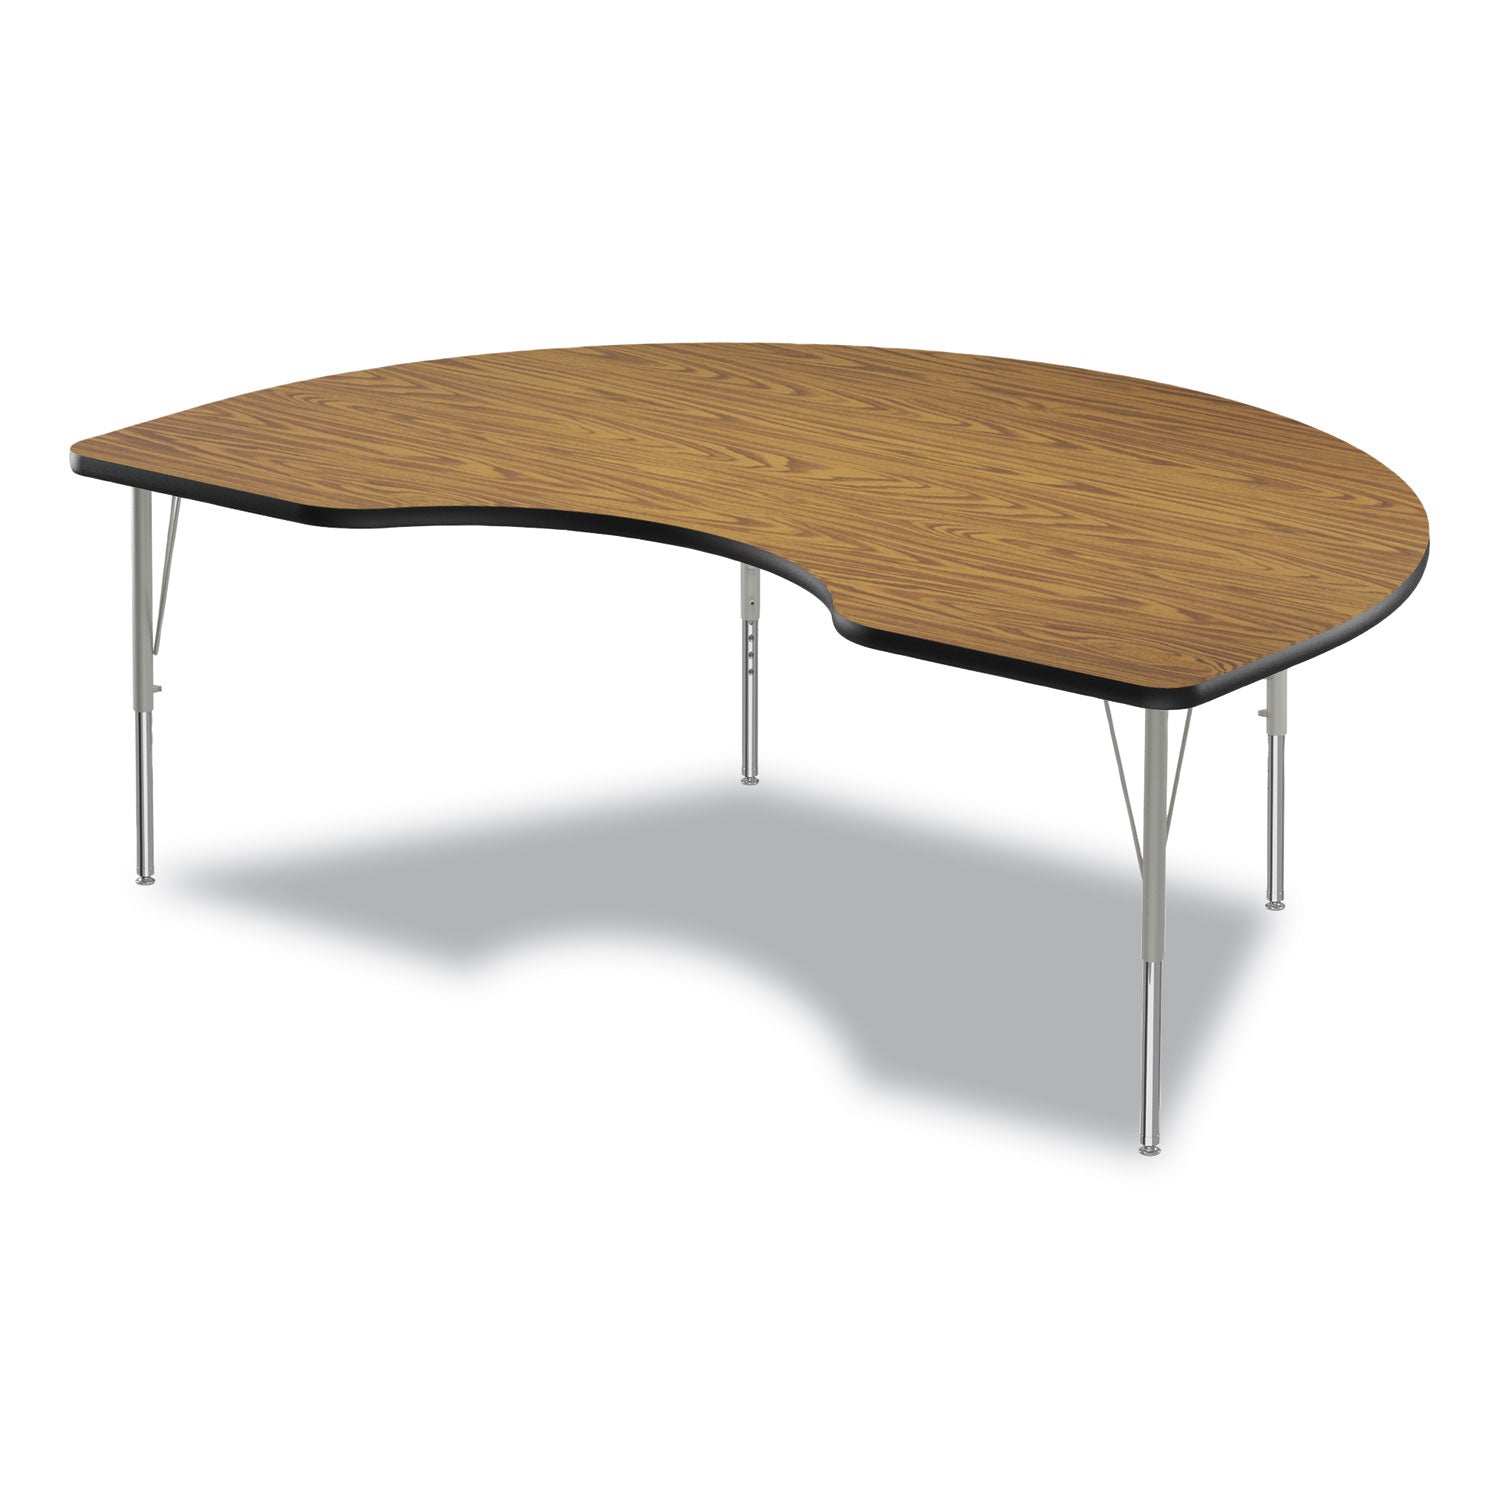 adjustable-activity-table-kidney-shape-72-x-48-x-19-to-29-med-oak-top-gray-legs-4-pallet-ships-in-4-6-business-days_crl4872tf06954p - 2